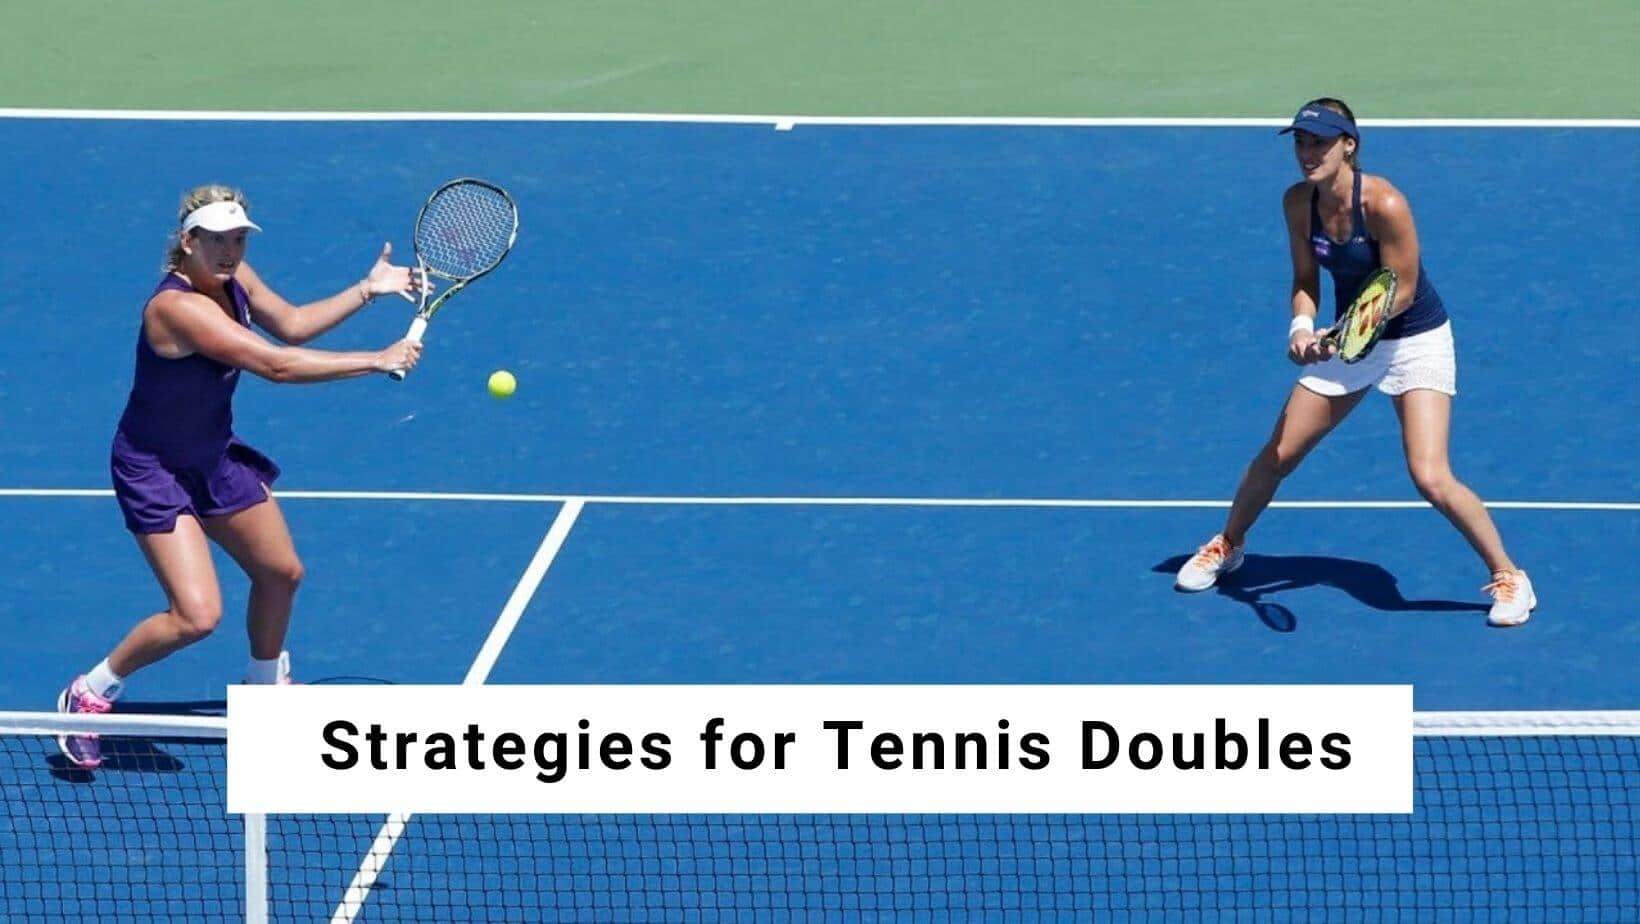 Tennis Doubles Strategy | 8 Most Effective Strategies 2021 